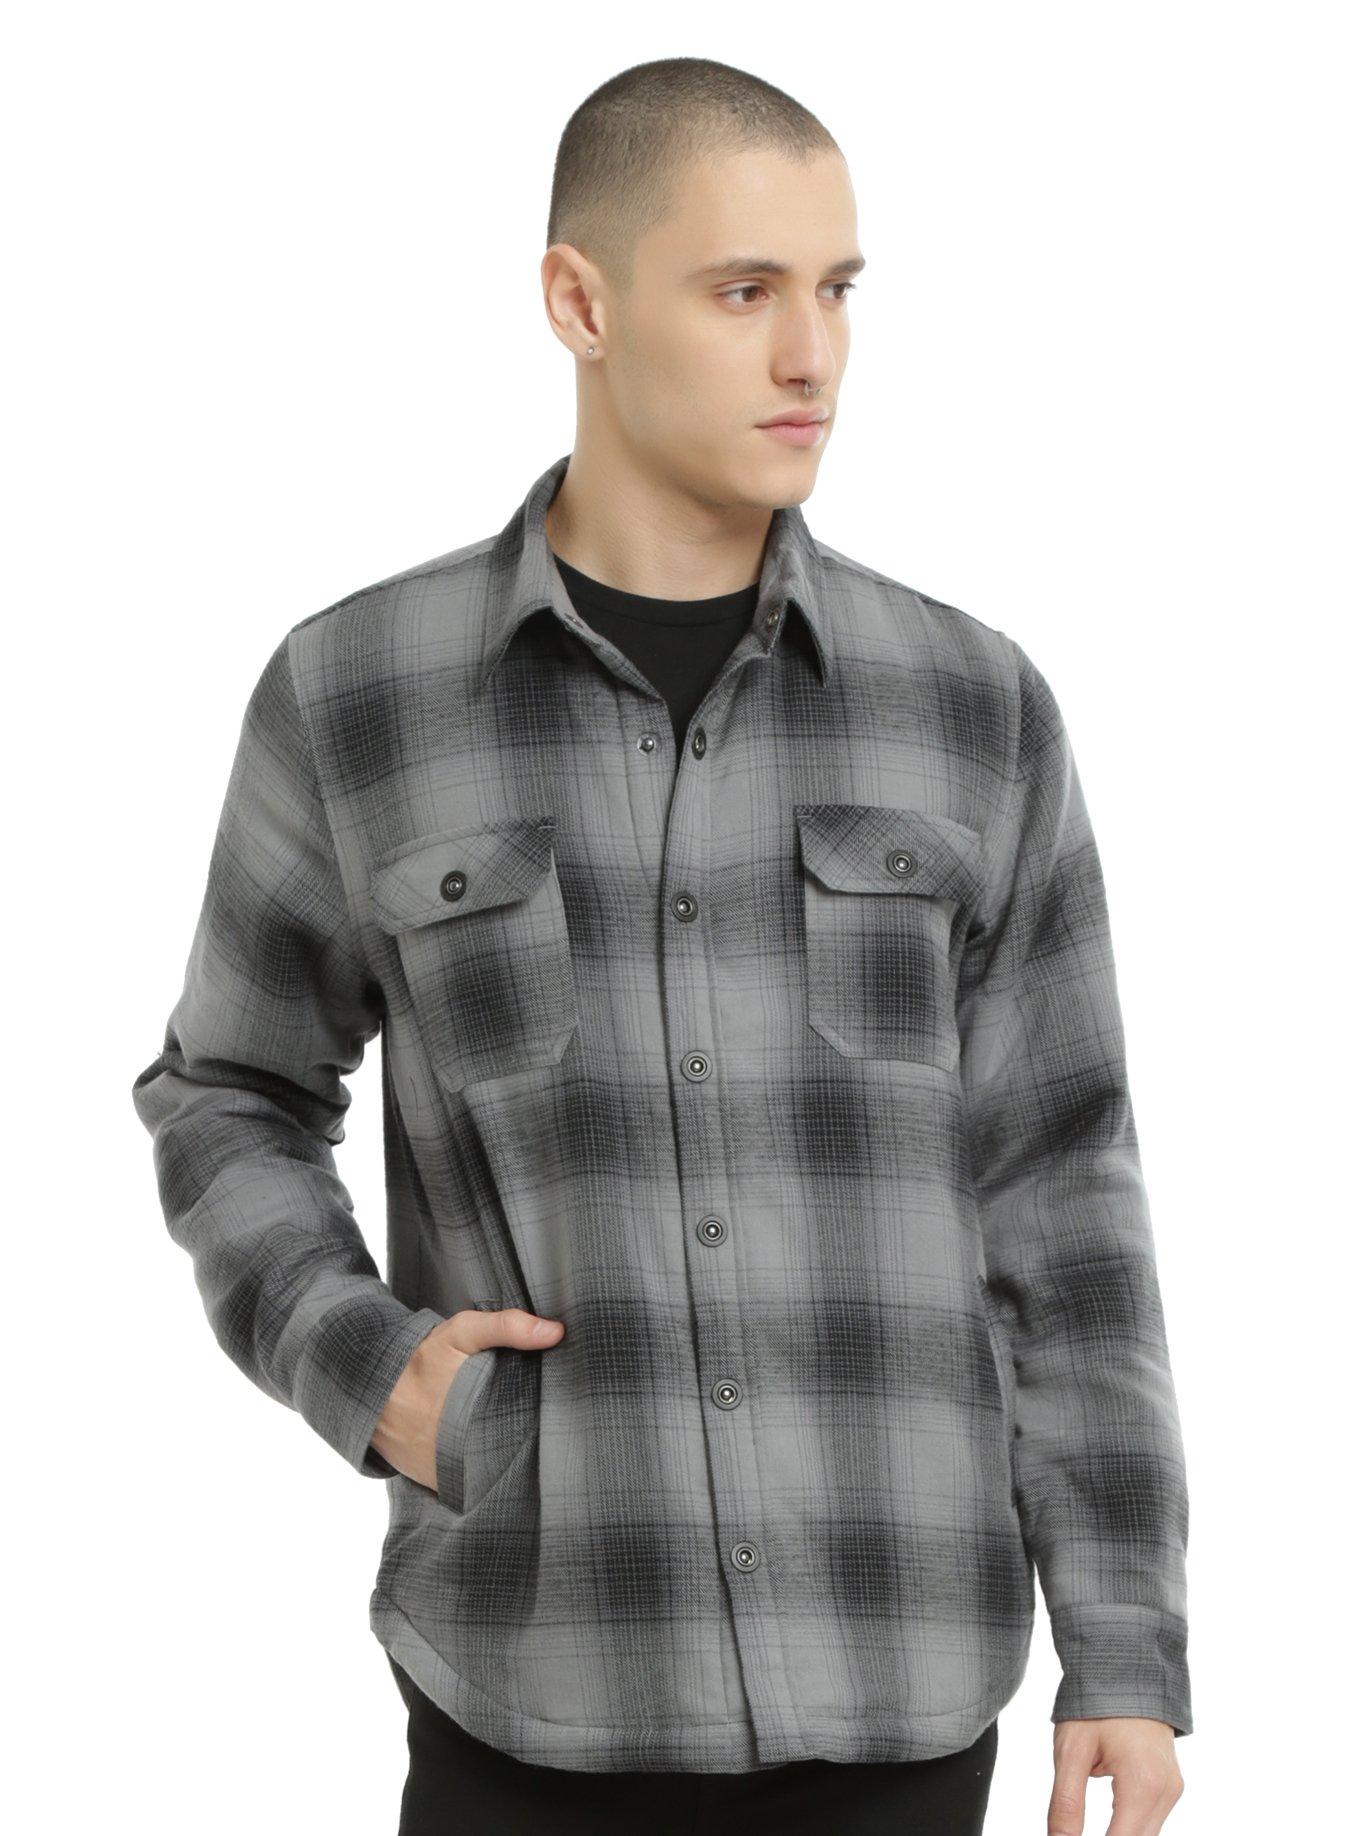 XXX RUDE Lined Grey Plaid Woven Button-Up Jacket, GREY, hi-res